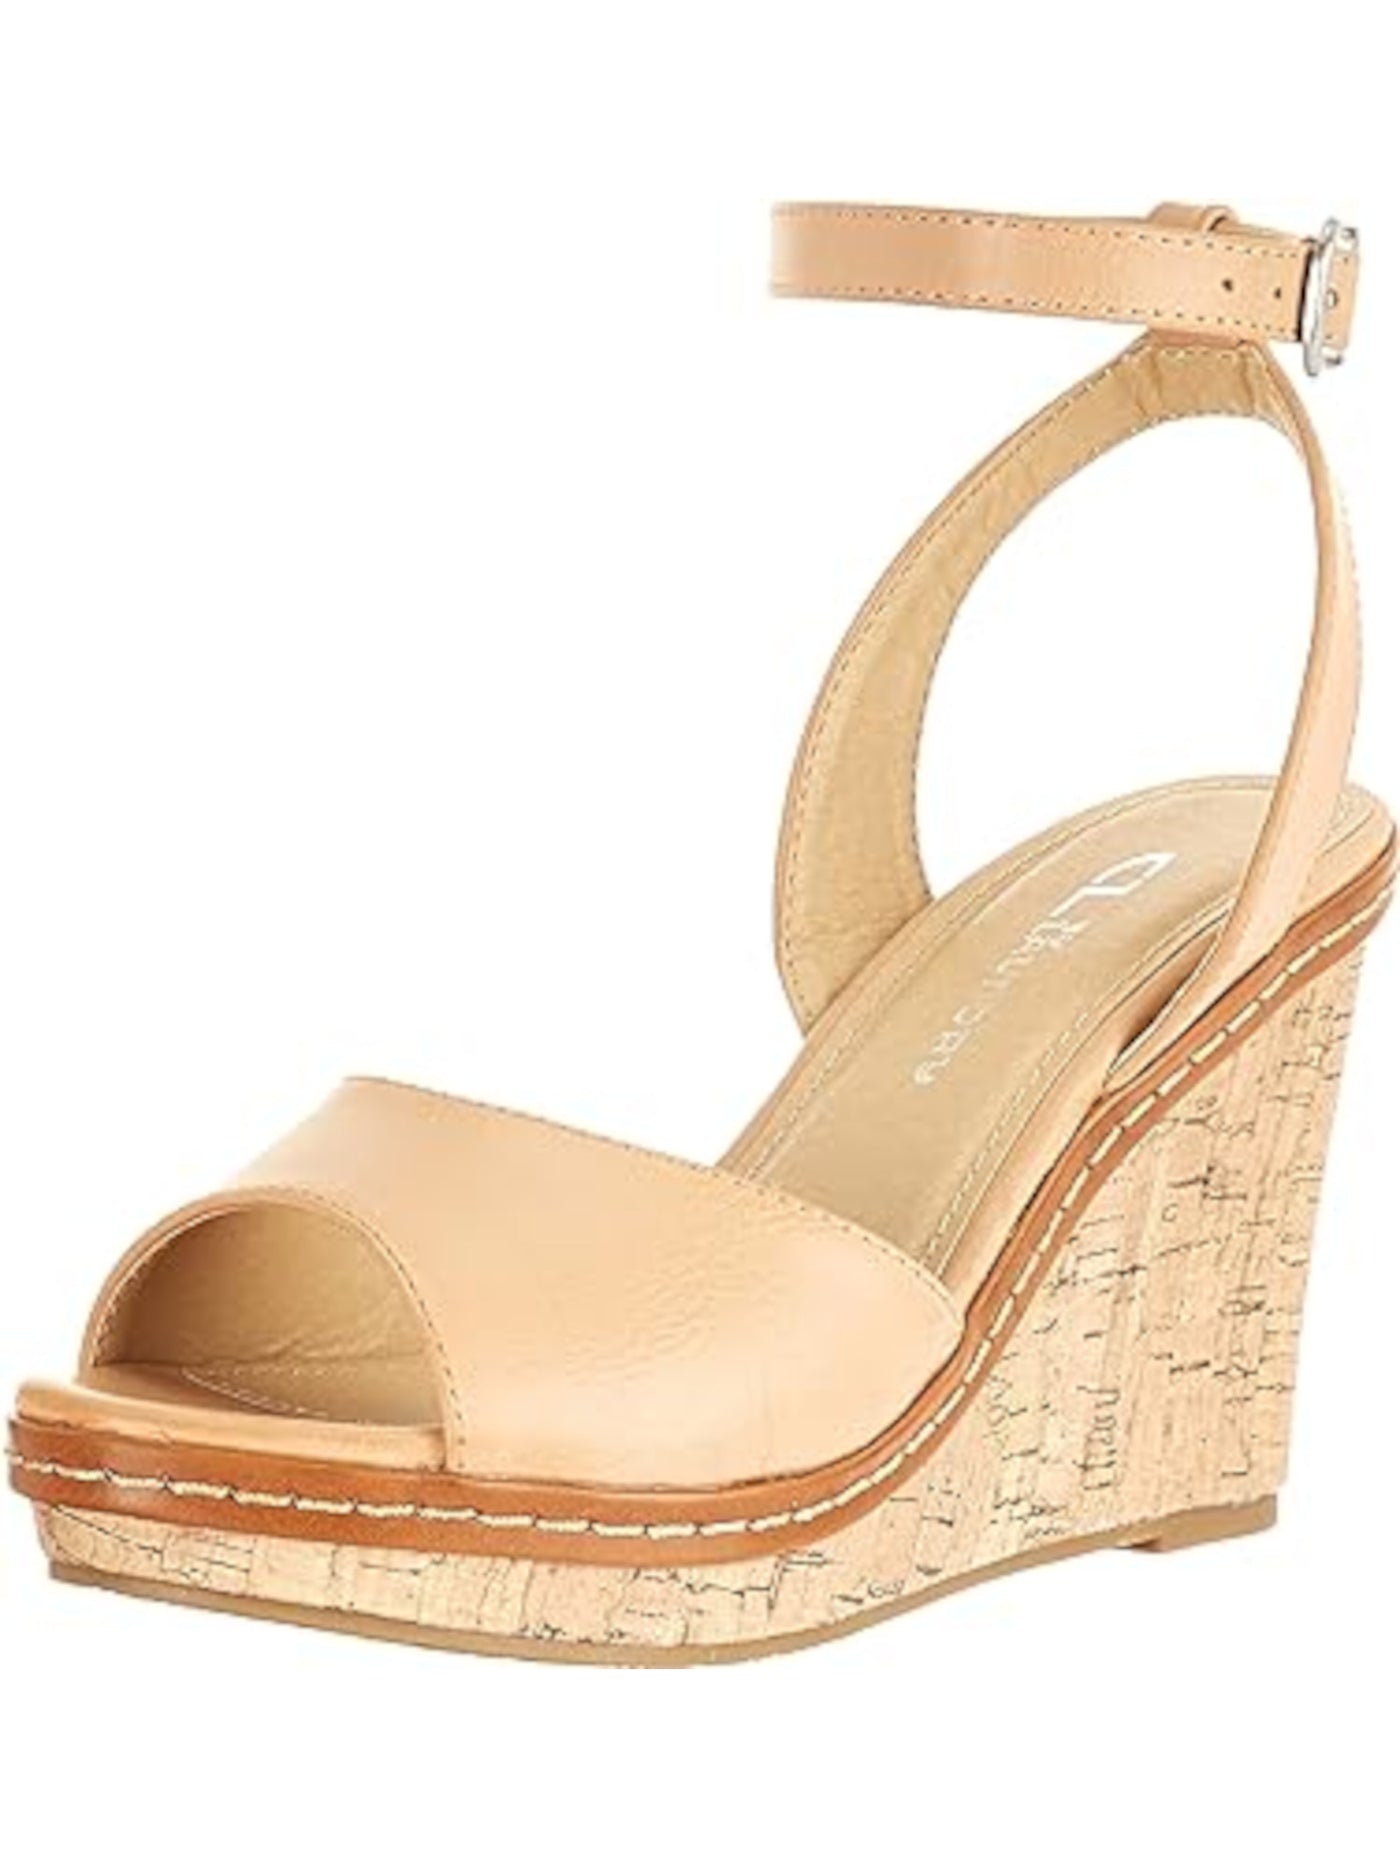 CL BY LAUNDRY Womens Beige 1" Platform Adjustable Ankle Strap Booming Open Toe Wedge Buckle Dress Sandals Shoes 9